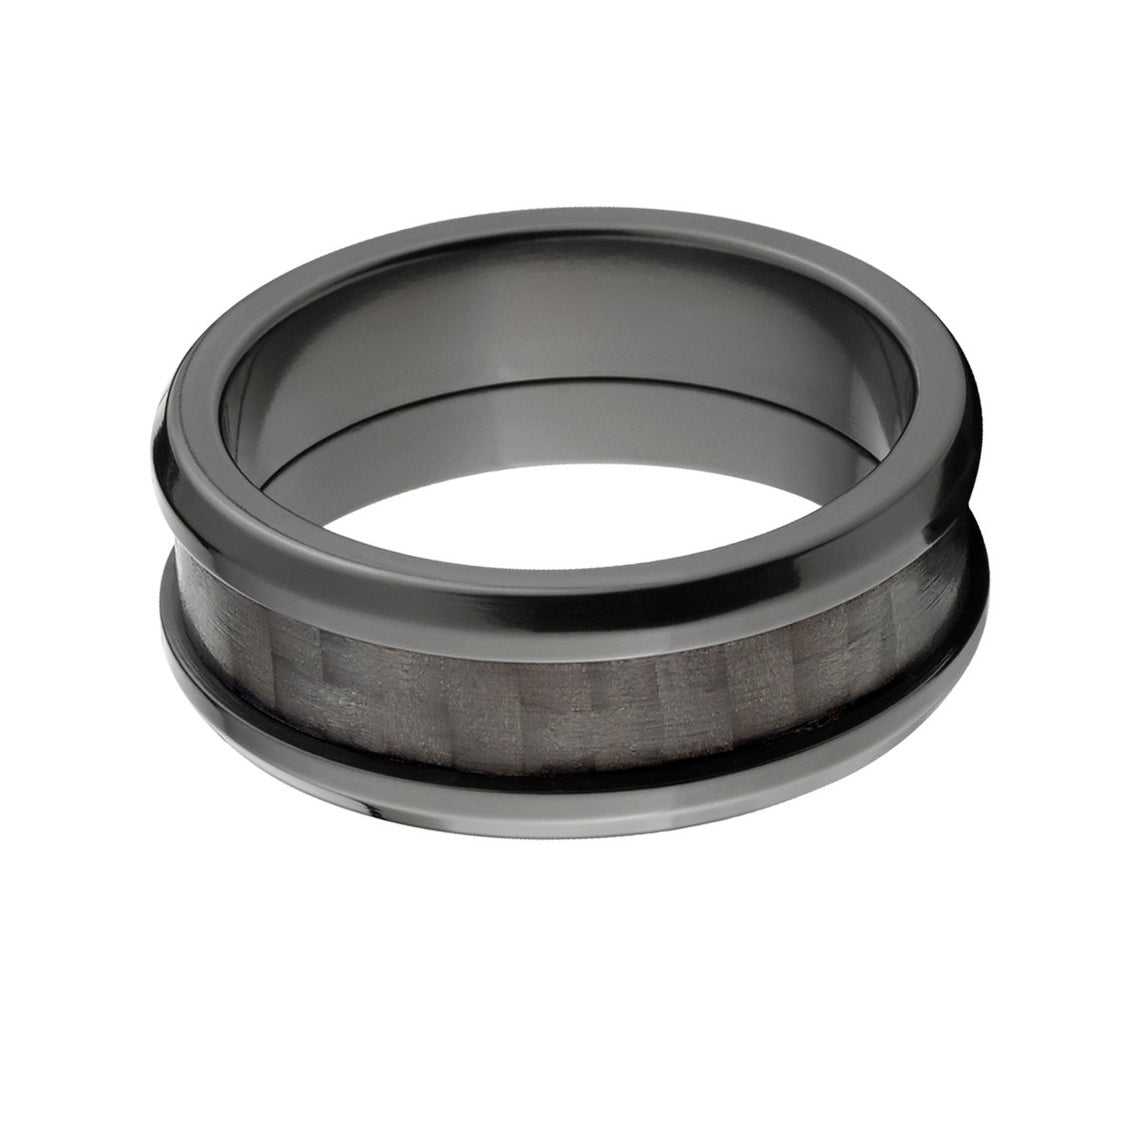 8mm wide black zirconium ring with a black carbon fiber inlay